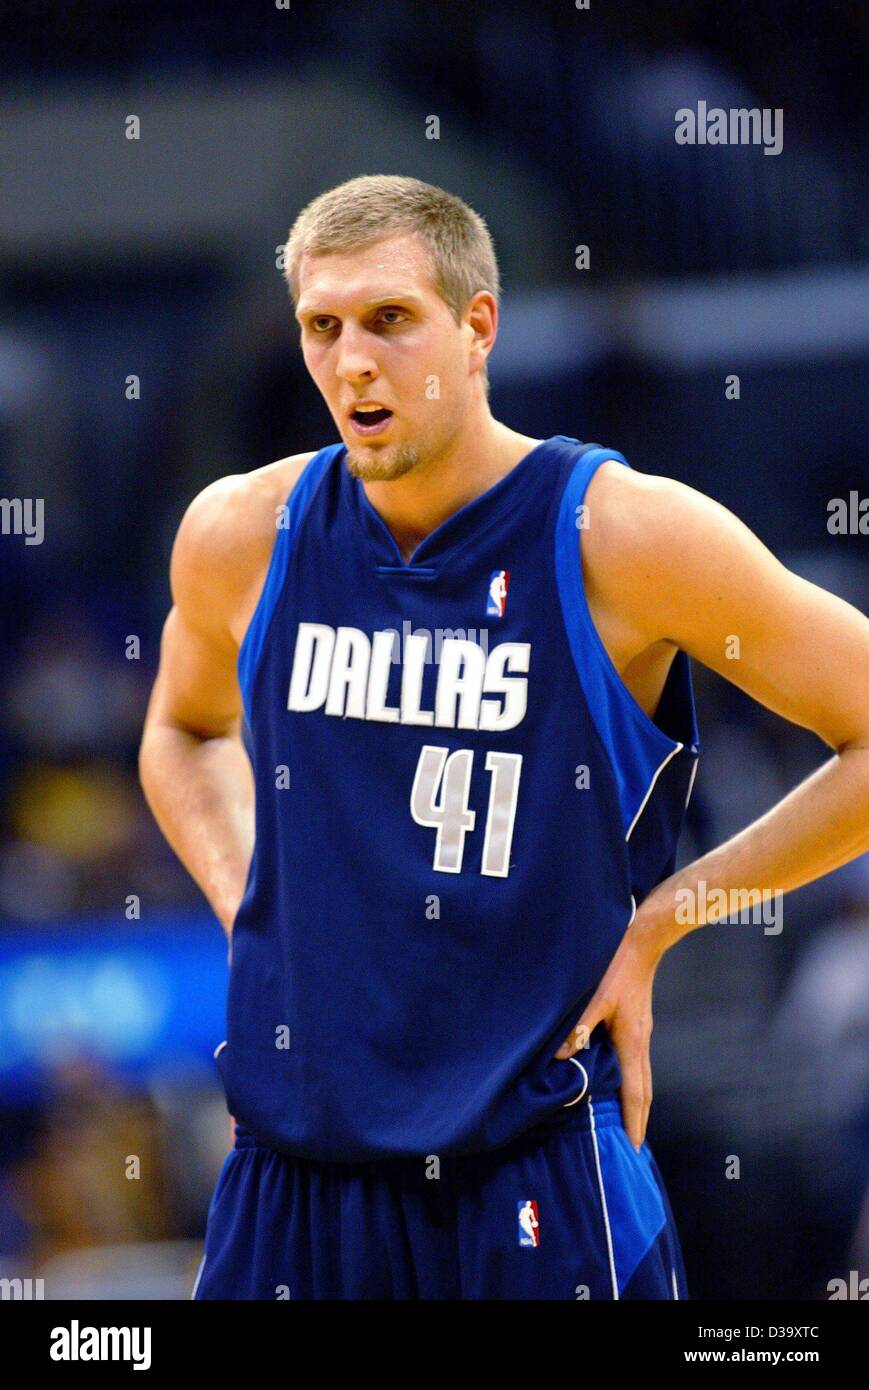 German basketball pro Dirk Nowitzki, who plays for the Dallas Mavericks, appears exhausted during the NBA championship match between Dallas Mavericks and Los Angeles Lakers in Los Angeles, California, USA, 13 December 2003. Stock Photo